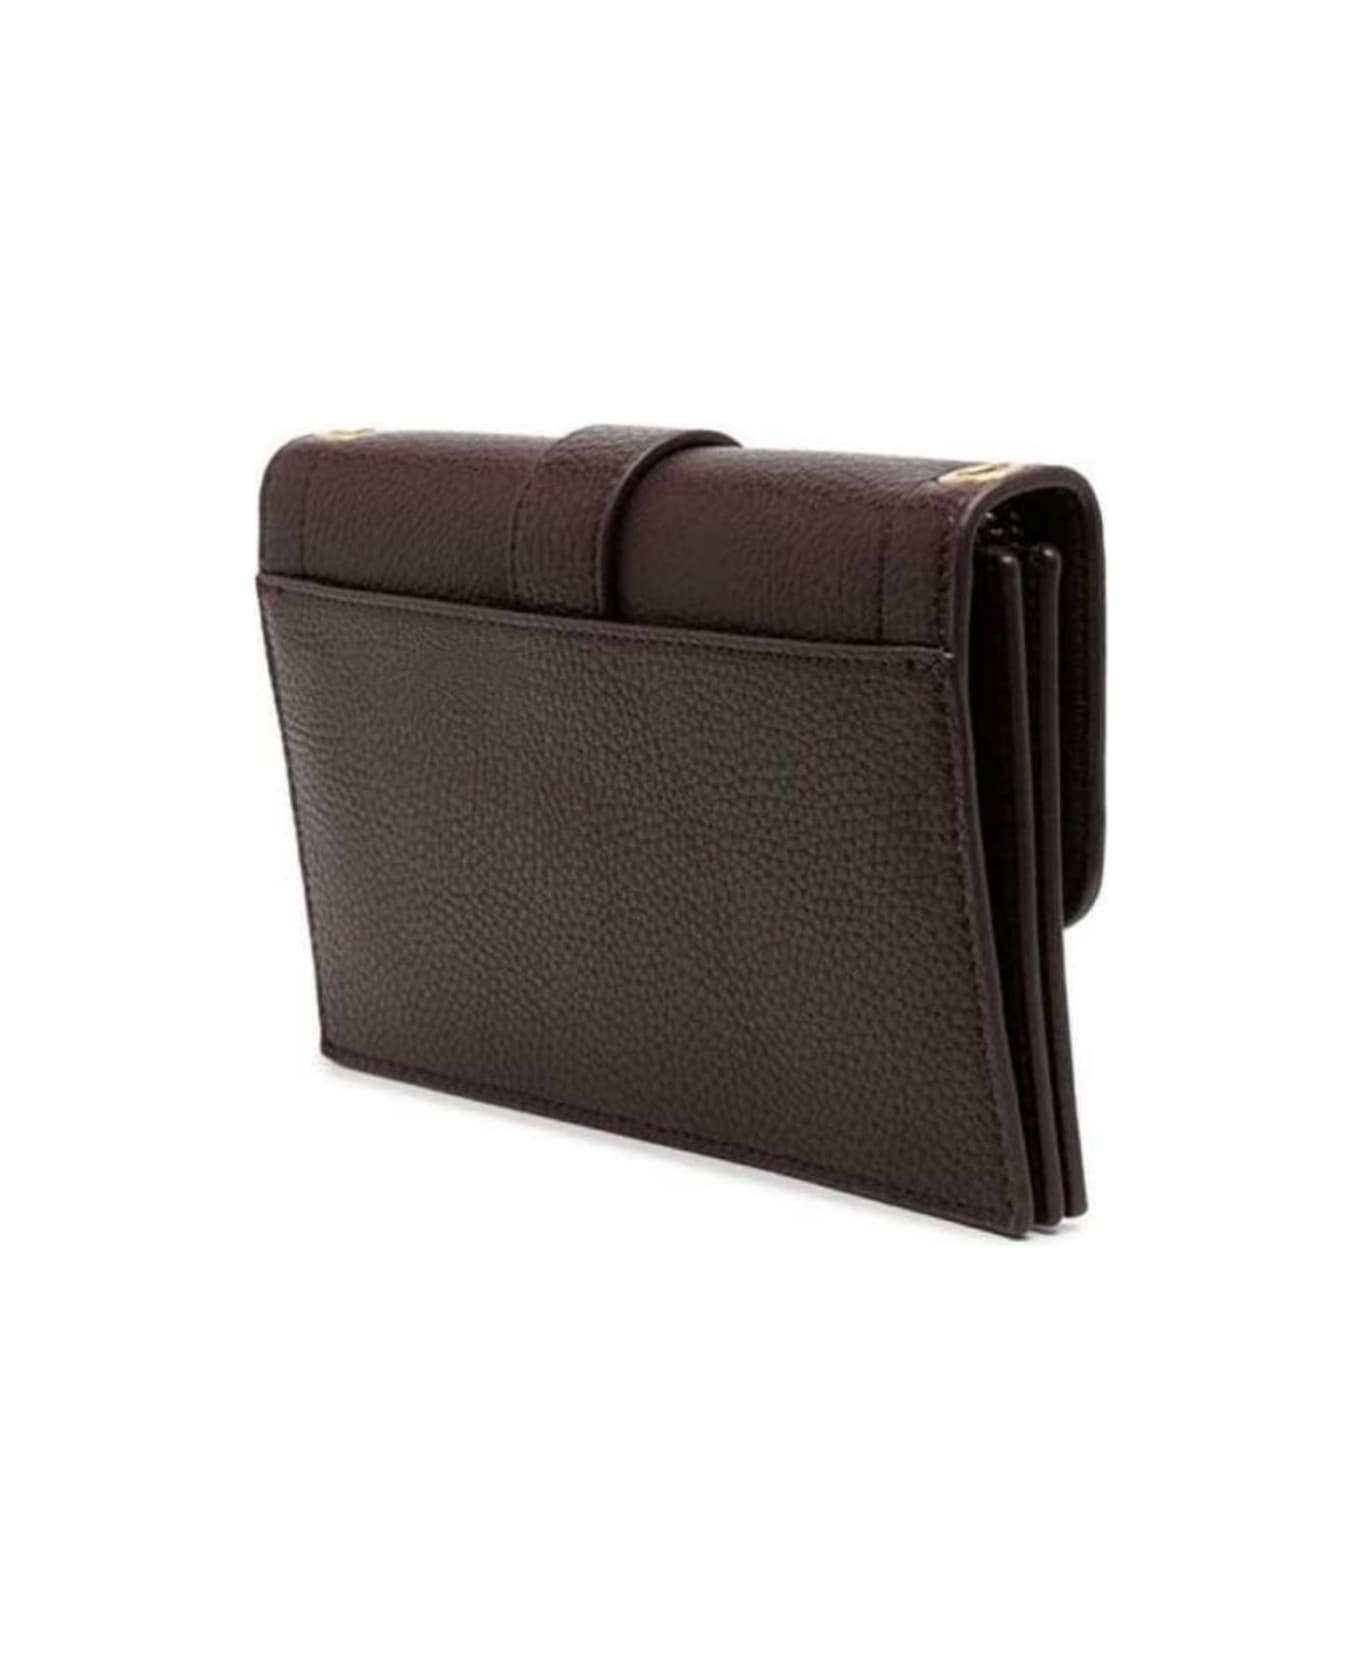 Versace Jeans Couture Wallet - Brown